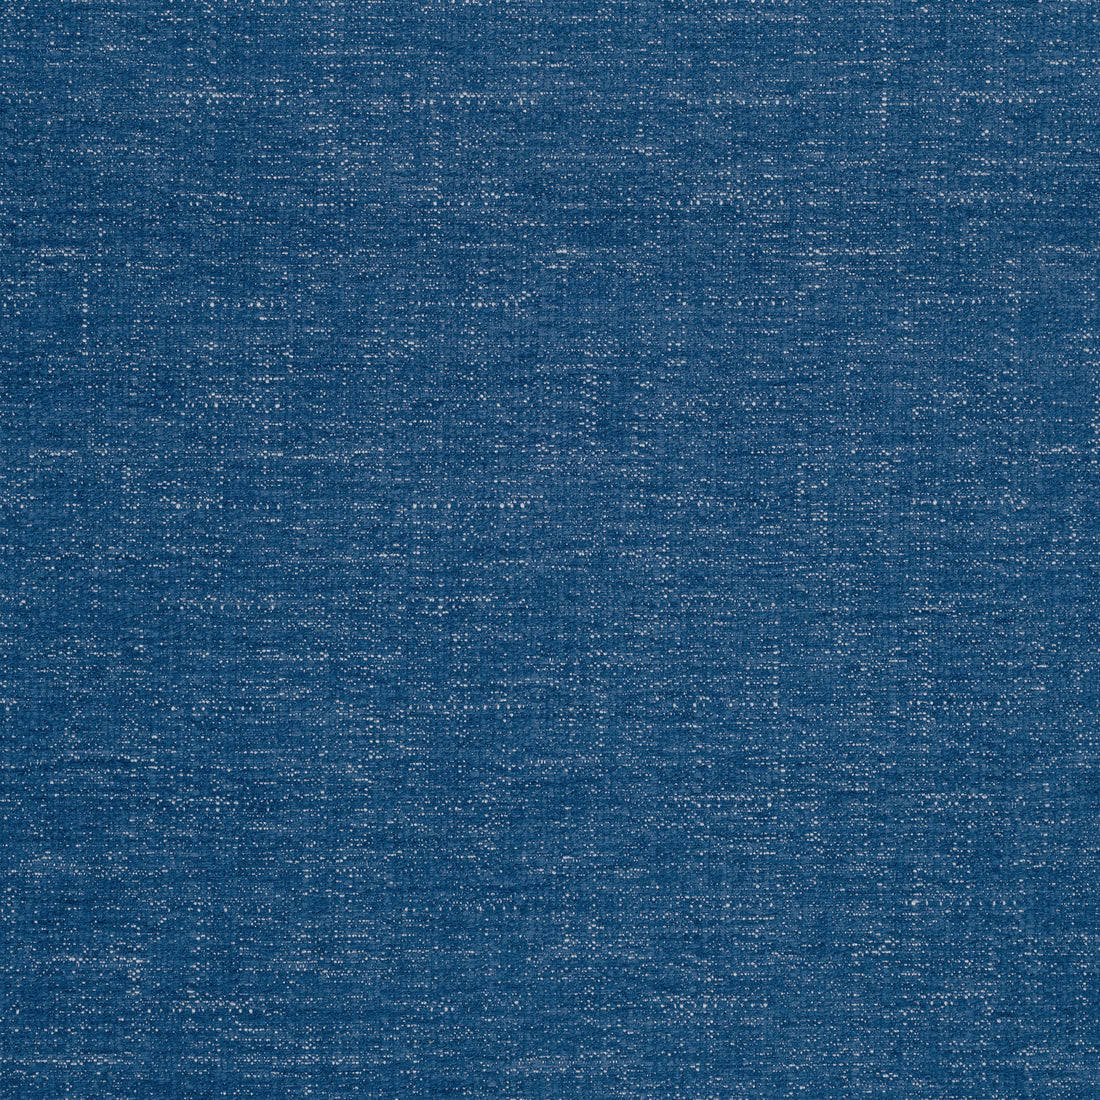 Vista fabric in marine blue color - pattern number W73392 - by Thibaut in the Landmark Textures collection